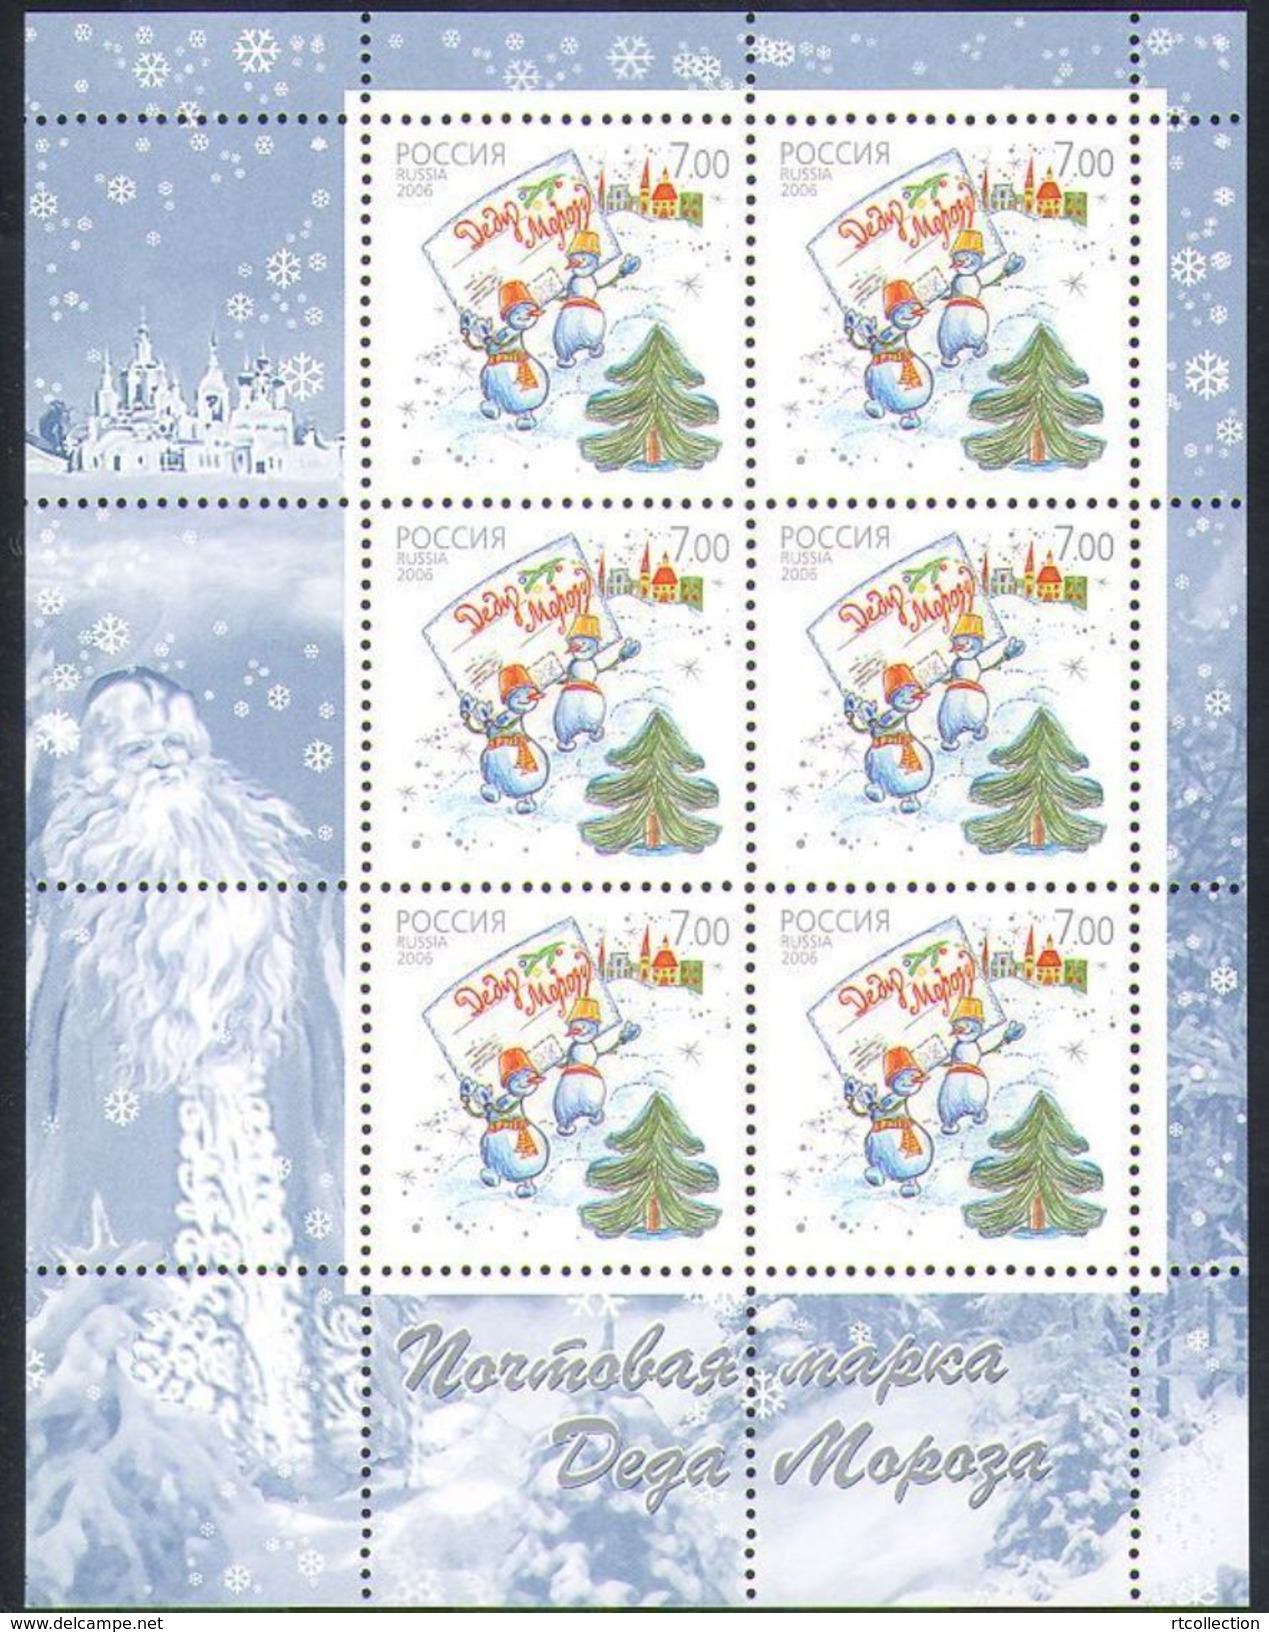 Russia 2006 Ded Moroz`s Postage Stamps Celebrations Snowman Christmas Holiday Tree Celebrations New Year Mi Klb 1388 - Verzamelingen